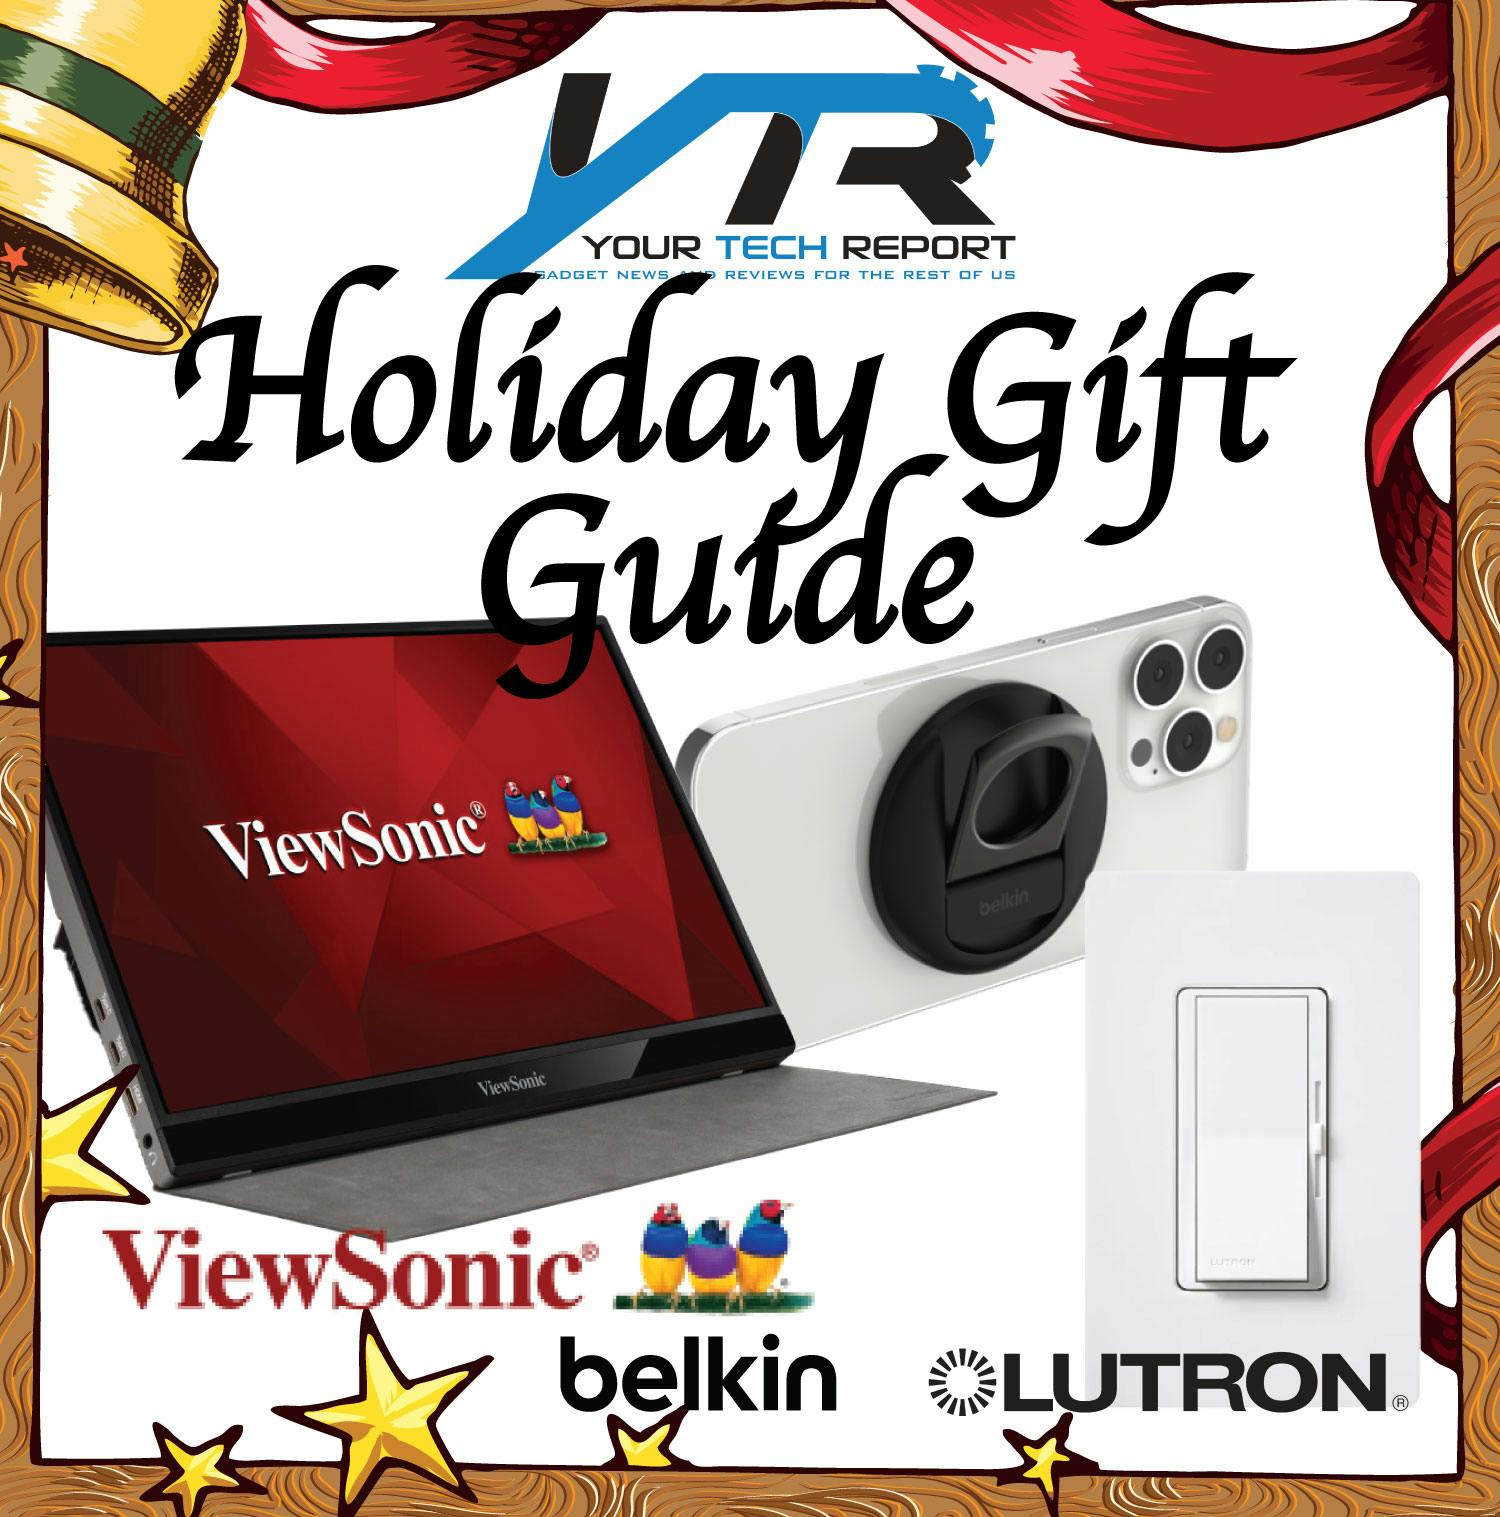 Viewsonic, Belkin and Lutron: YourTechReport Holiday Gift Guide